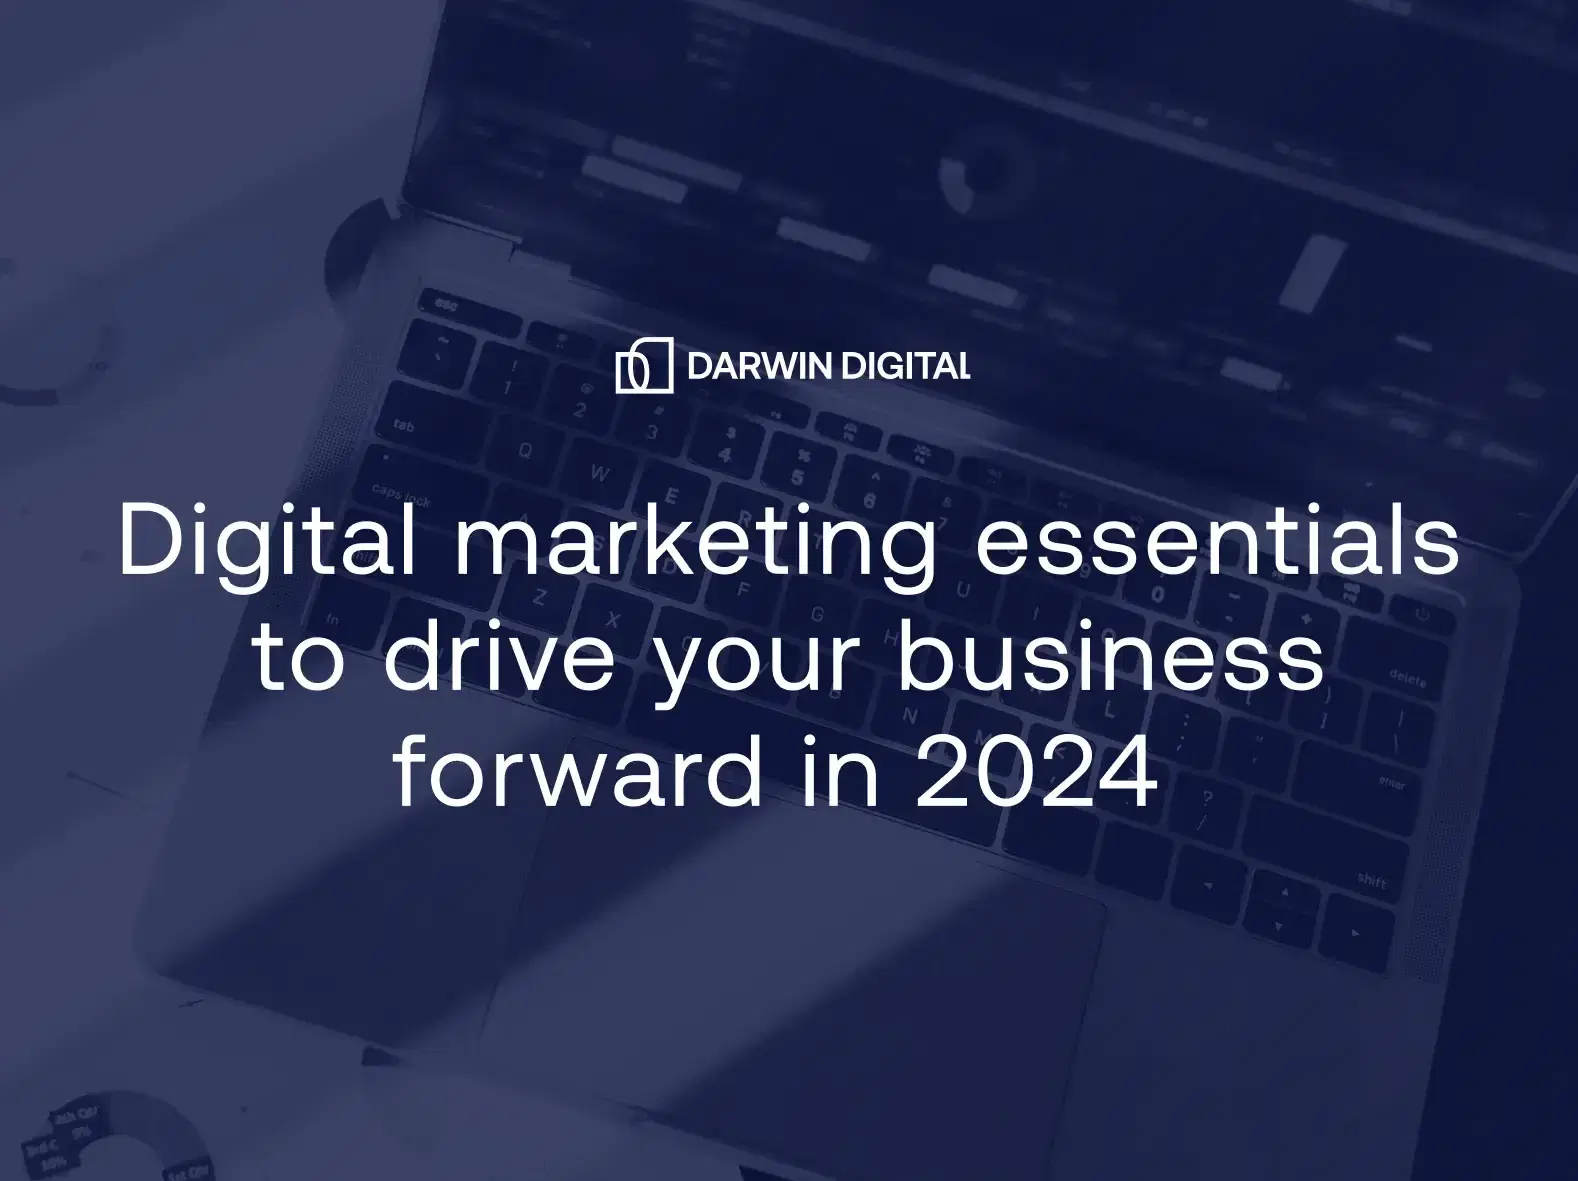 Digital marketing essentials to drive your business forward in 2024